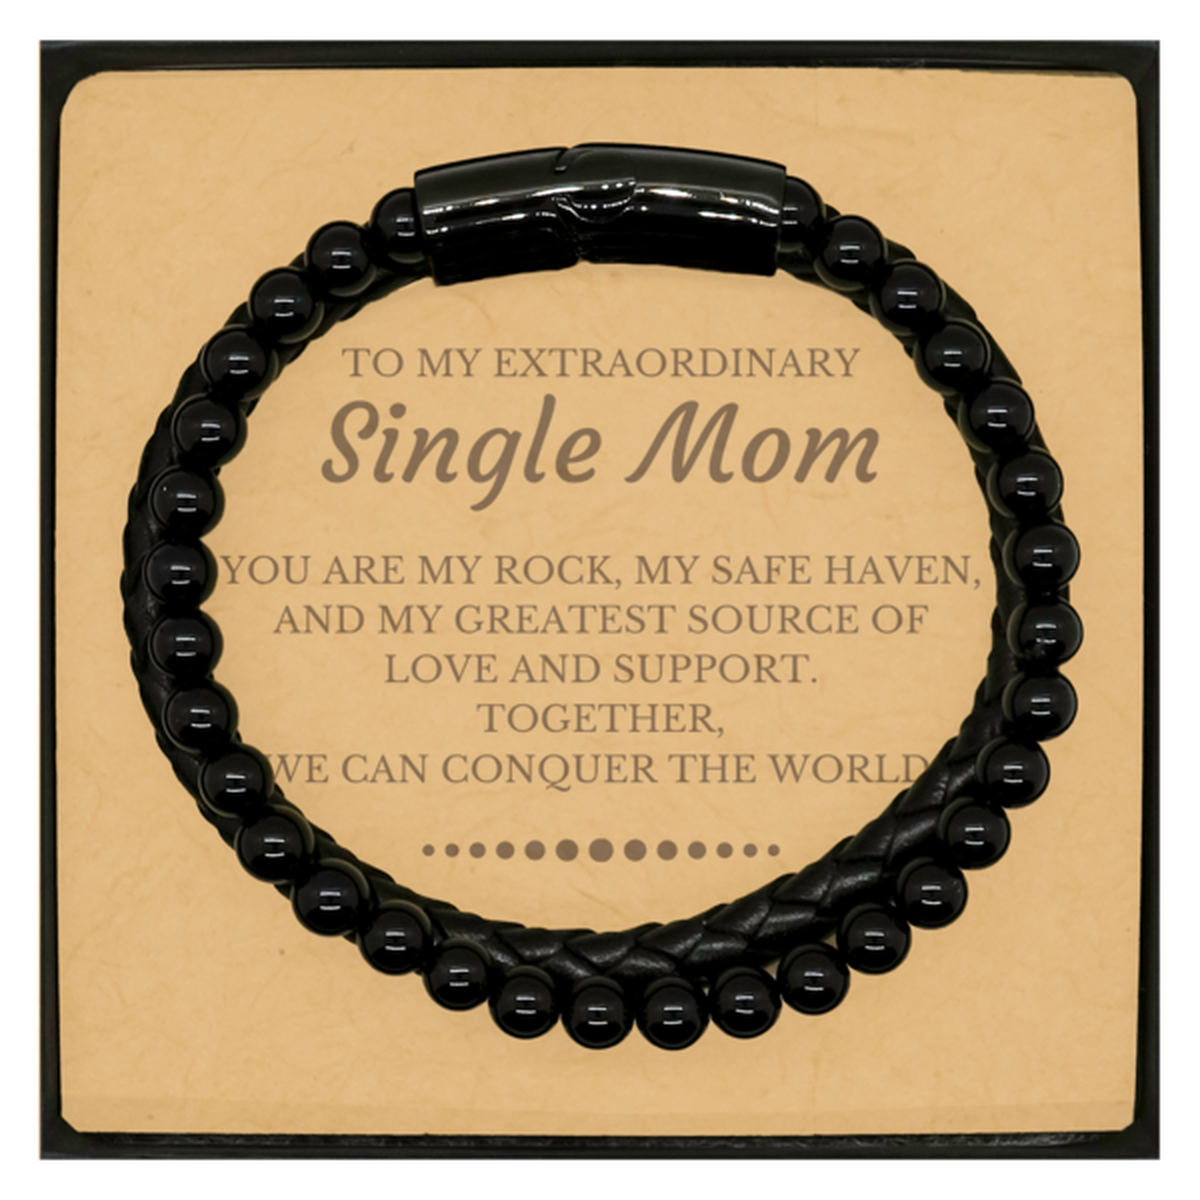 To My Extraordinary Single Mom Gifts, Together, we can conquer the world, Birthday Christmas Stone Leather Bracelets For Single Mom, Christmas Gifts For Single Mom